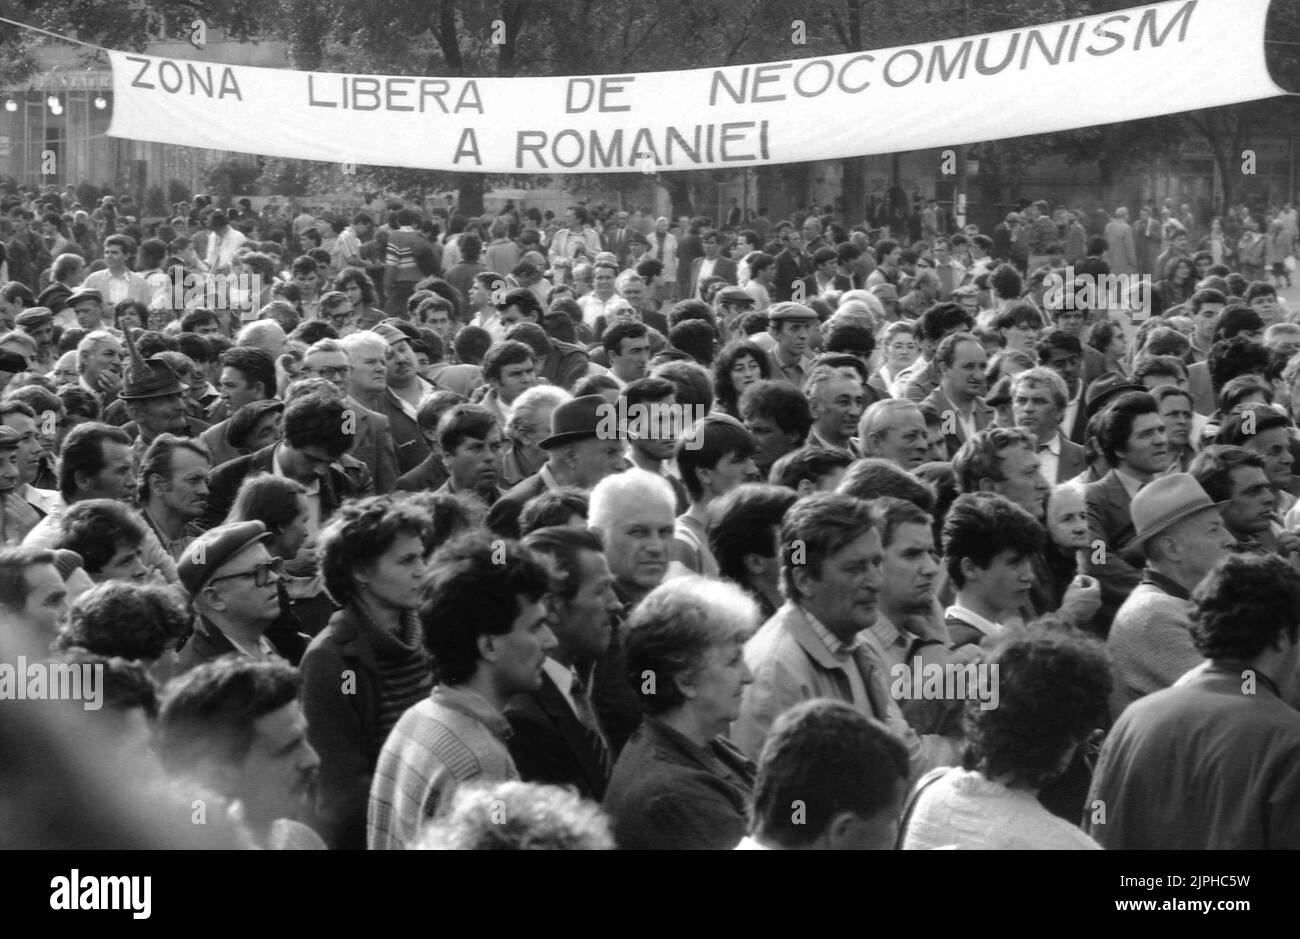 Bucharest, Romania, April 1990. 'Golaniada', a major anti-communism protest  in the University Square following the Romanian Revolution of 1989. People would gather daily to protest the ex-communists that grabbed the power after the Revolution. The main demand was that no former party member would be allowed to run in the elections of May 20th. The banner says 'Romania's neo-communism free zone'. Stock Photo